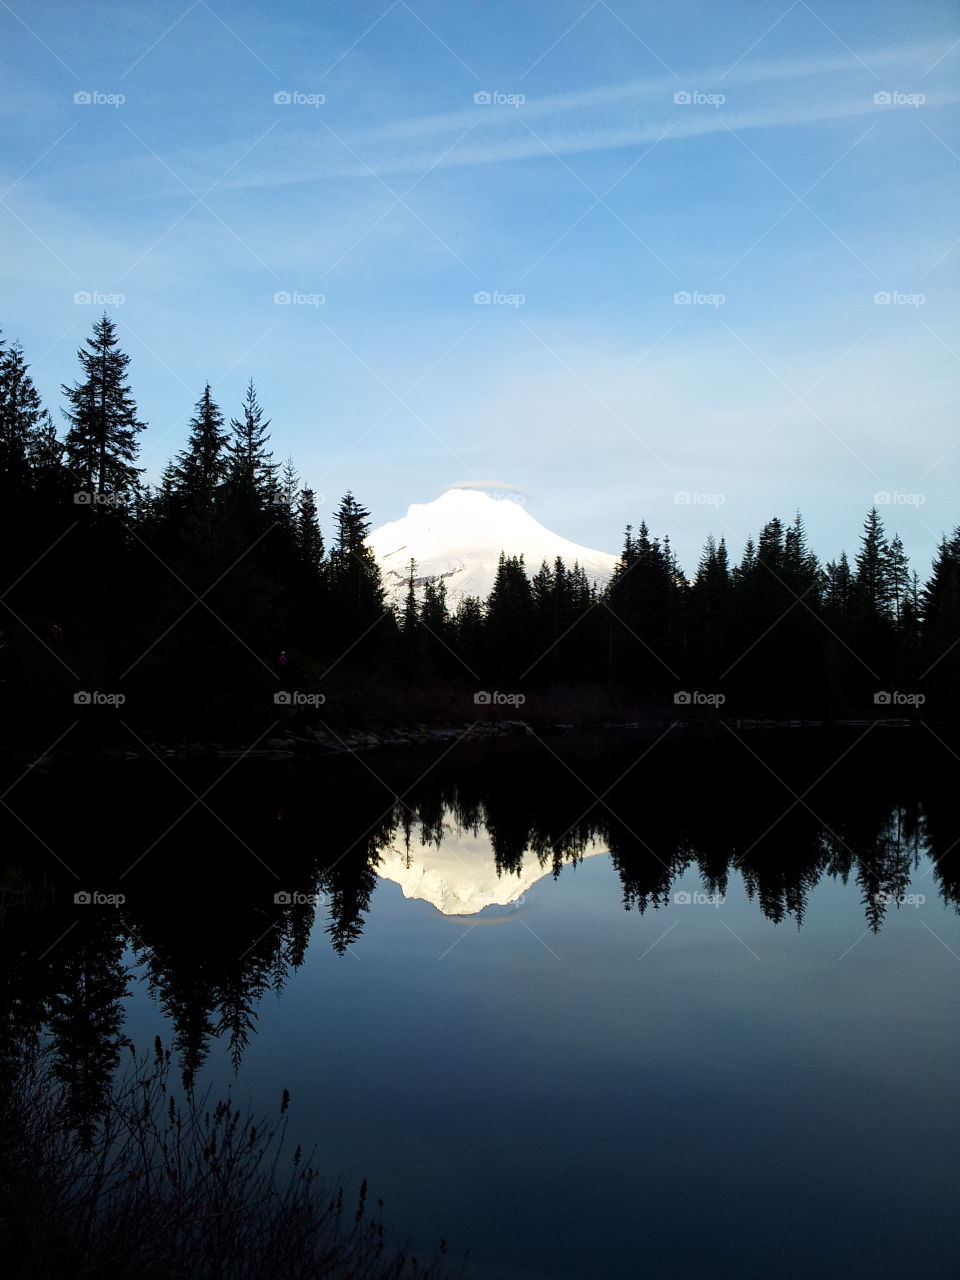 Mirror Lake. HIked up Mt. hood to discover this view of mirror pond.